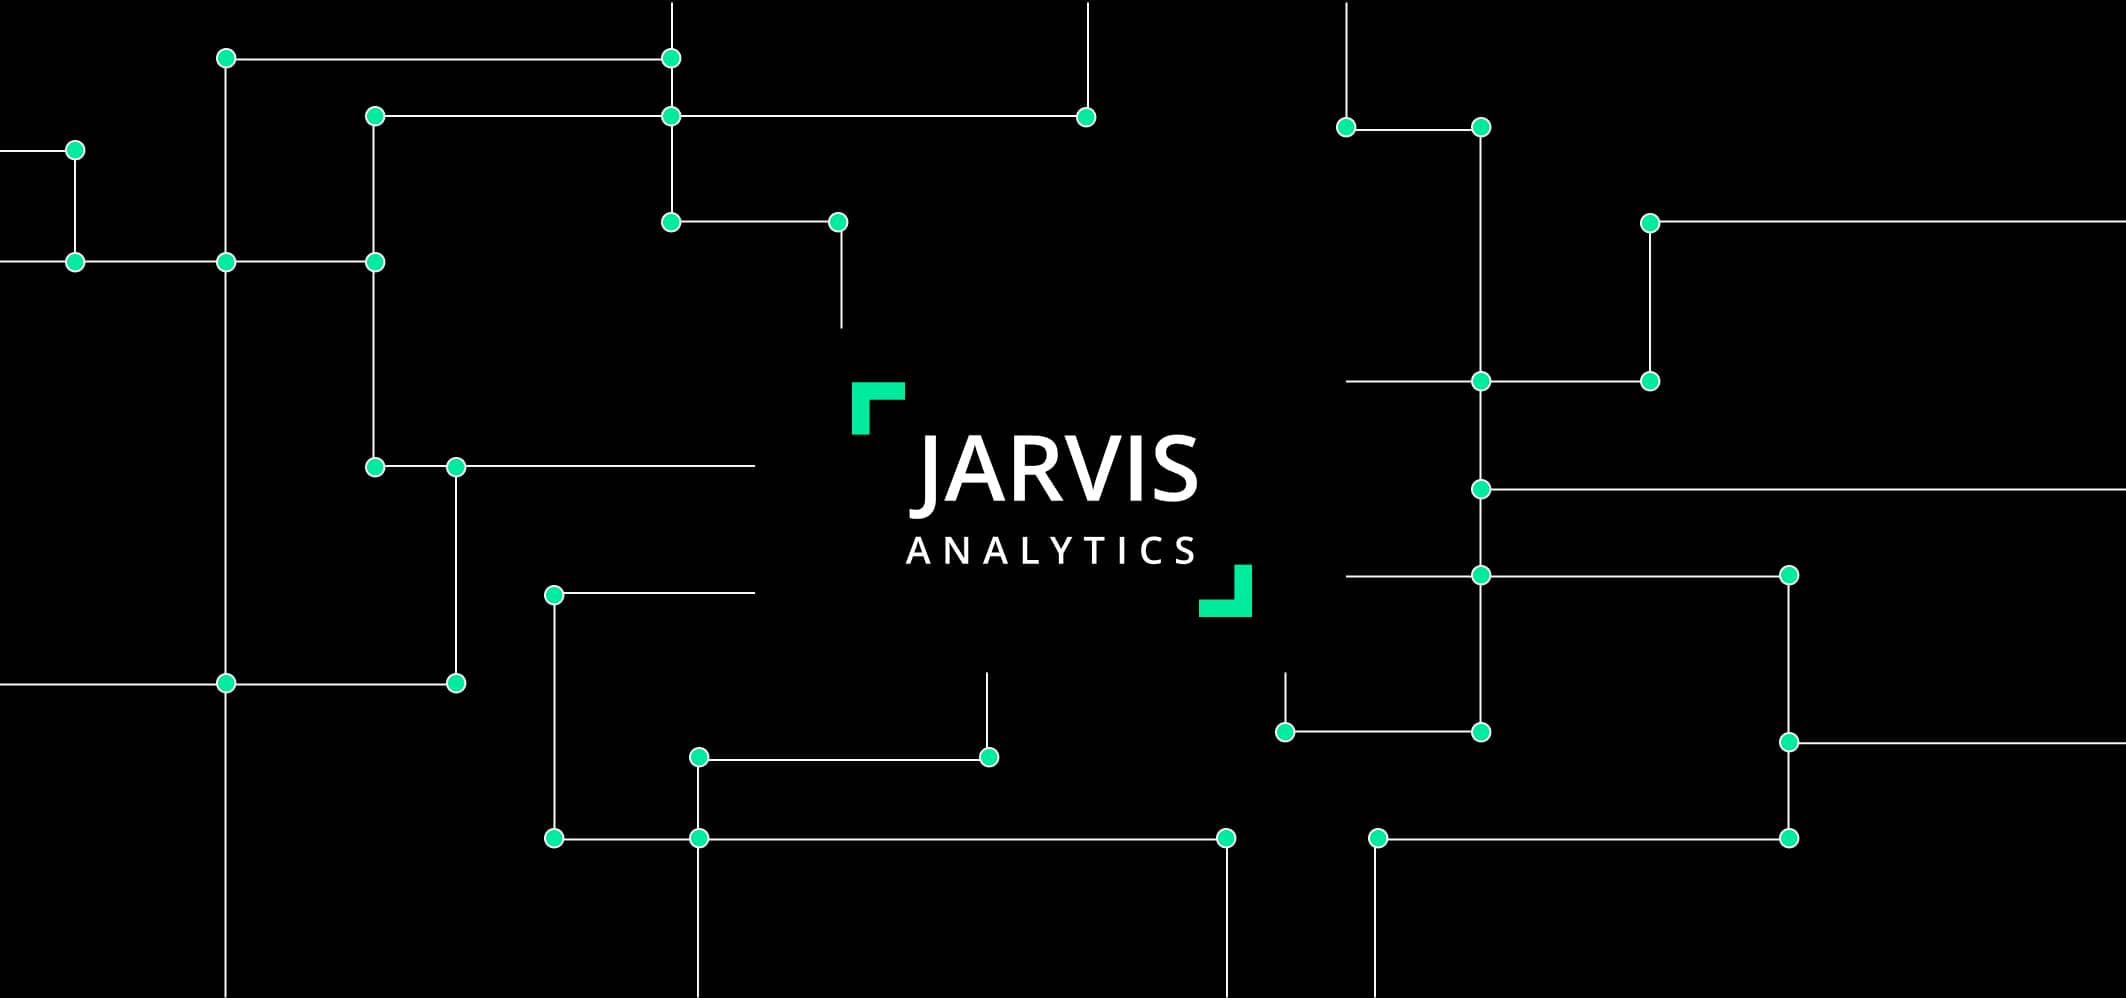 Dreamers & Doers: Jarvis Analytics – “Jarvis Analytics helps anyone in the practice visualize the data that’s most important”